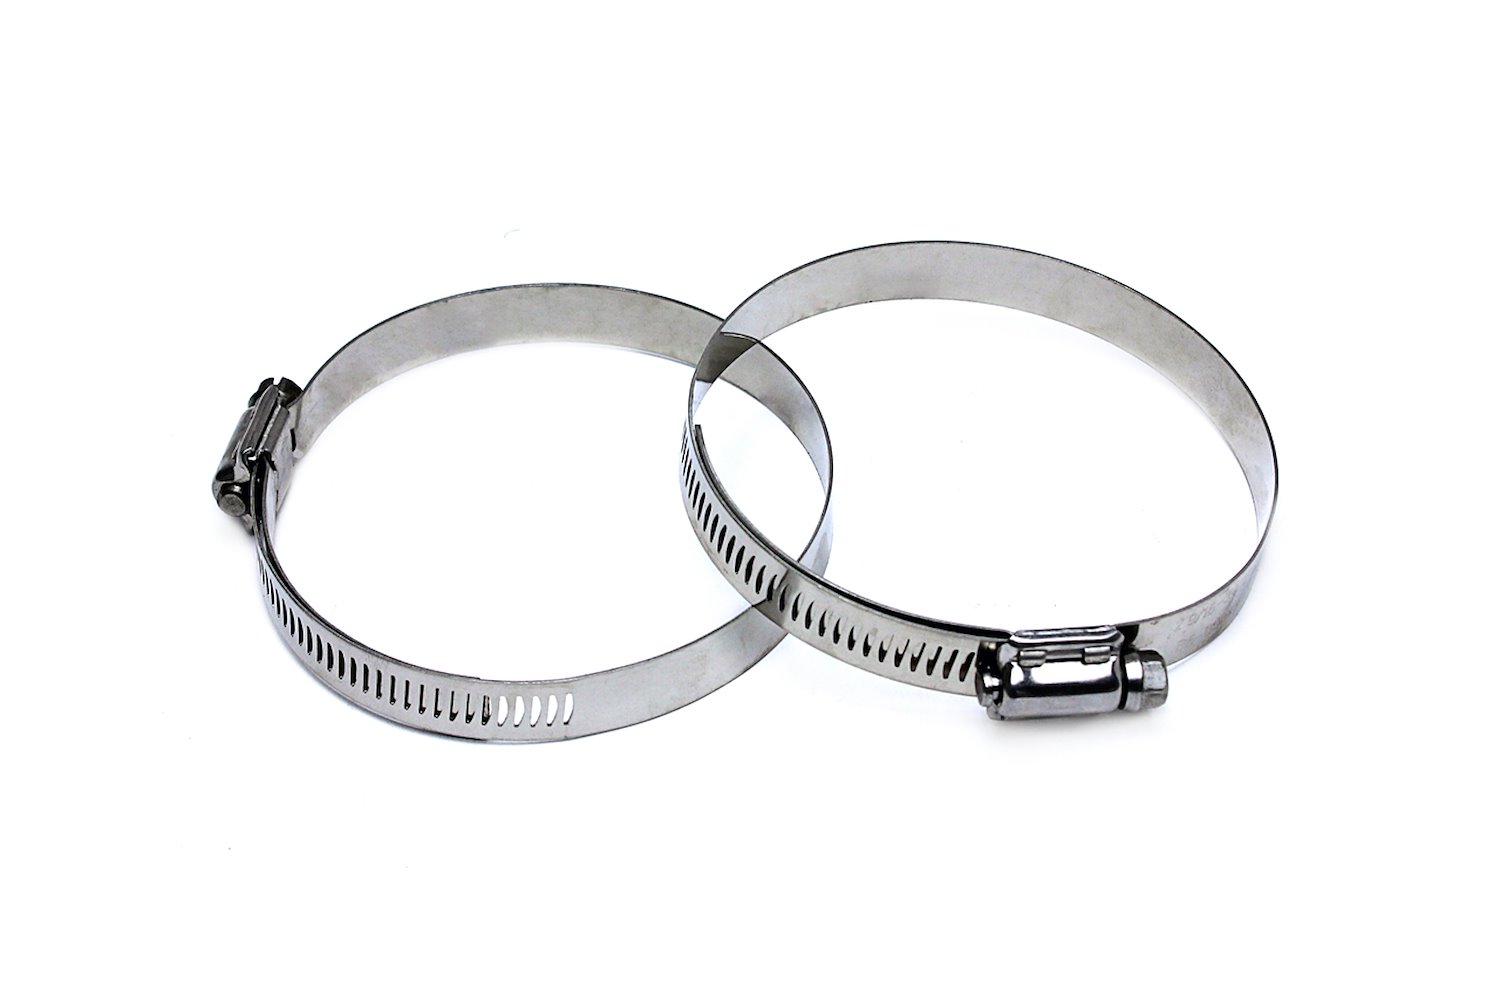 SSWC-91-114x2 Stainless Steel Worm Gear Hose Clamp, Effective Range: 3-9/16 in.- 4-1/2 in., 2Pc